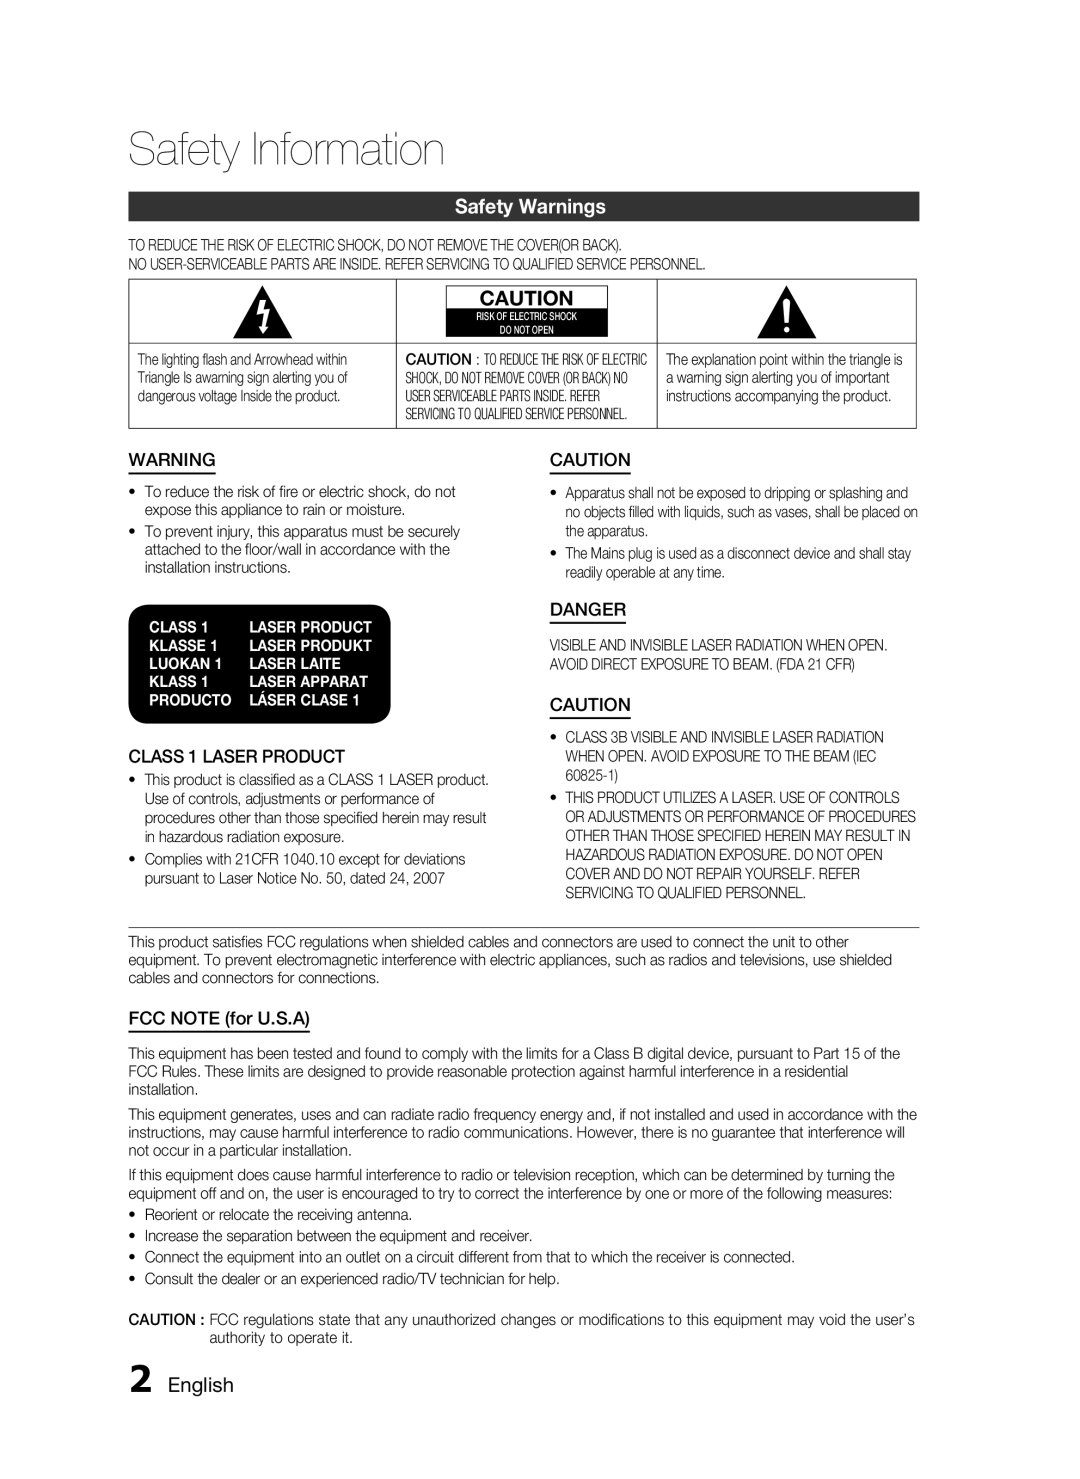 Samsung HT-D550 Safety Information, Safety Warnings, English, Class, Klasse, Luokan, Laser Laite, Laser Apparat, Producto 